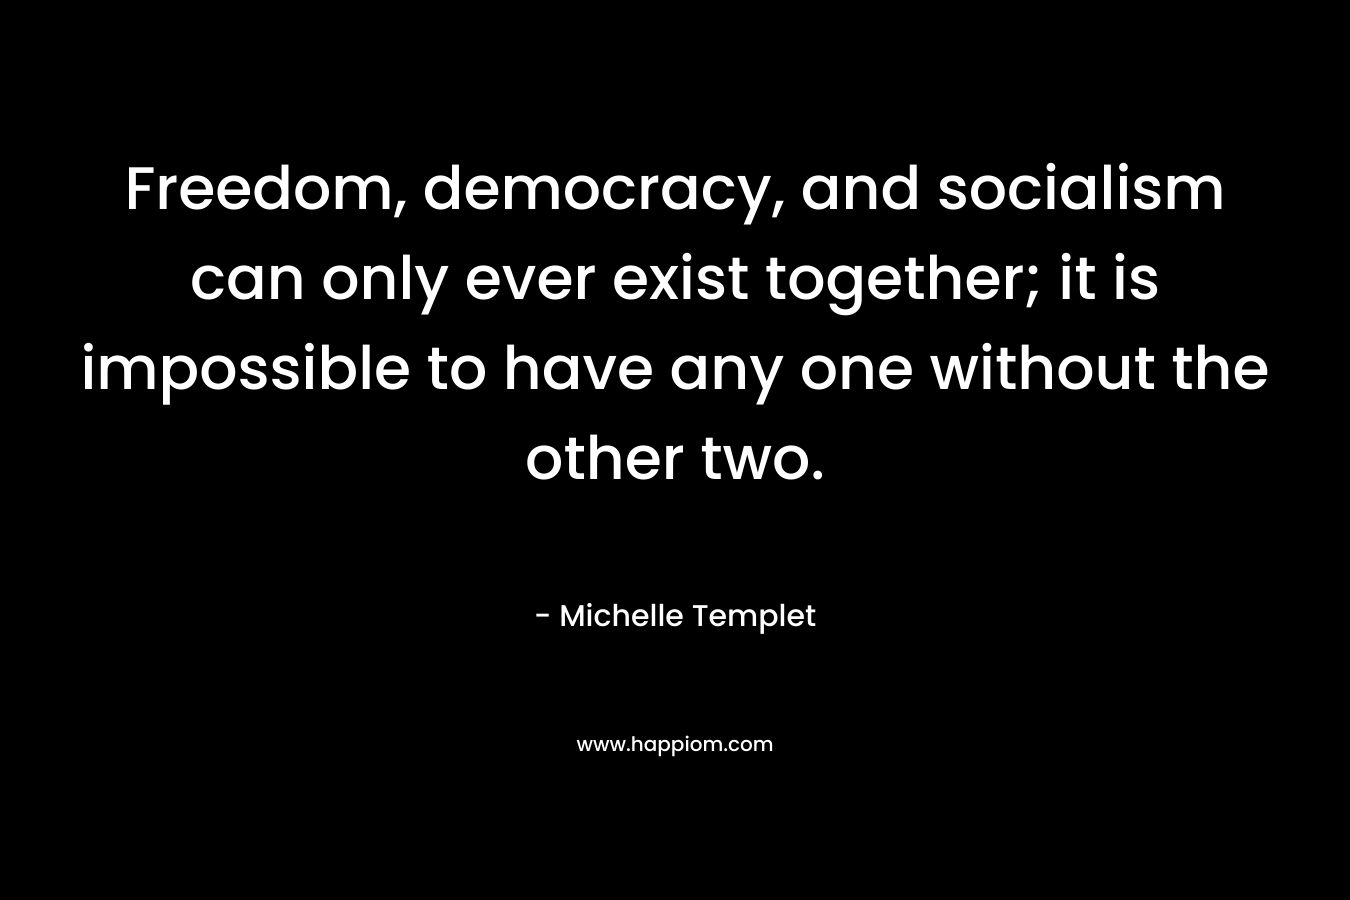 Freedom, democracy, and socialism can only ever exist together; it is impossible to have any one without the other two. – Michelle Templet